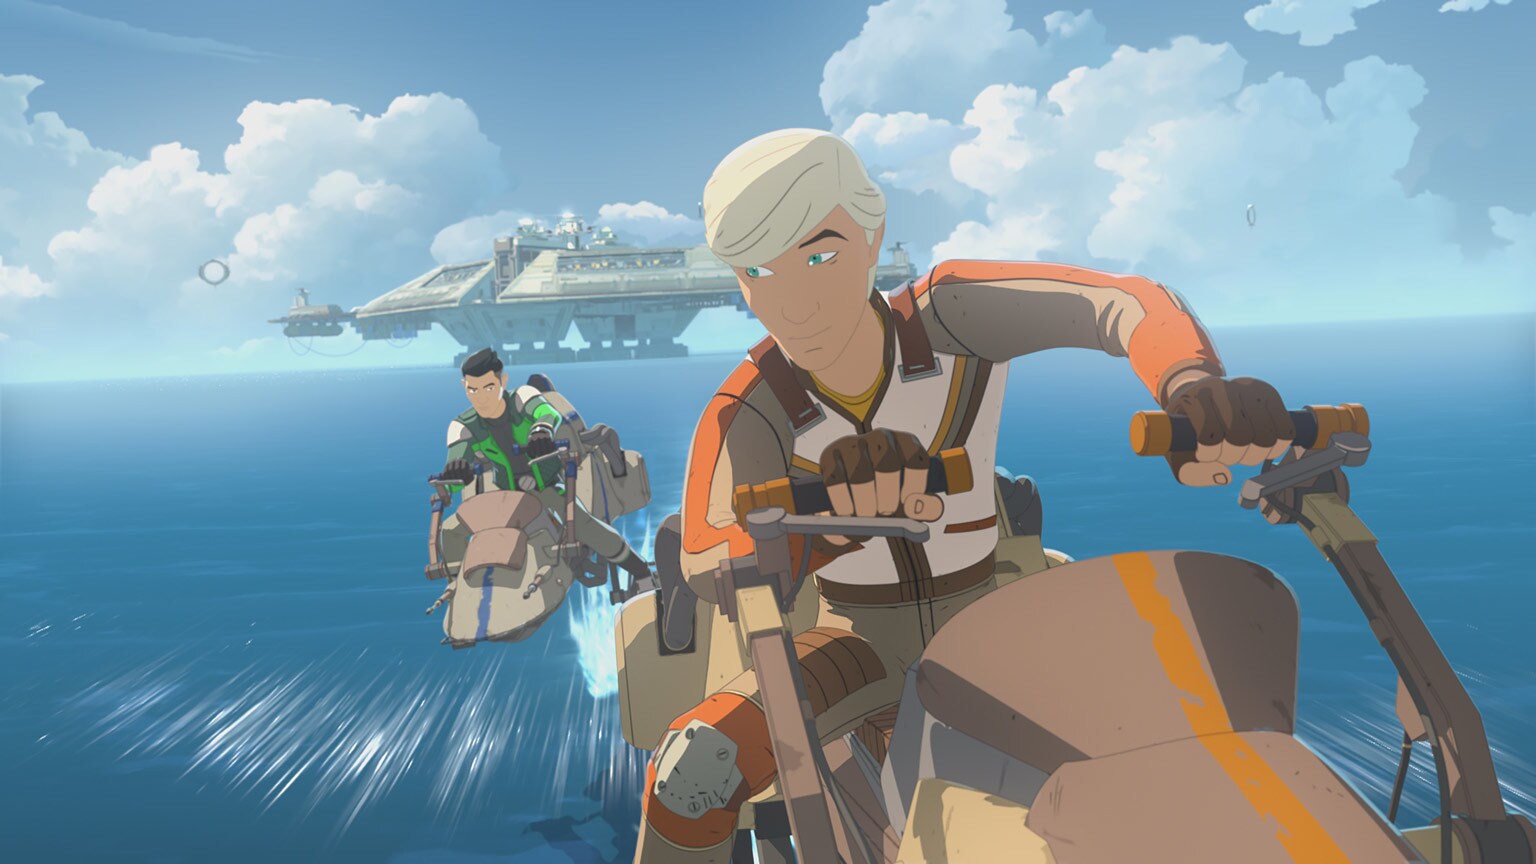 Bucket's List Extra: 10 Fun Facts from "Fuel for the Fire" - Star Wars Resistance